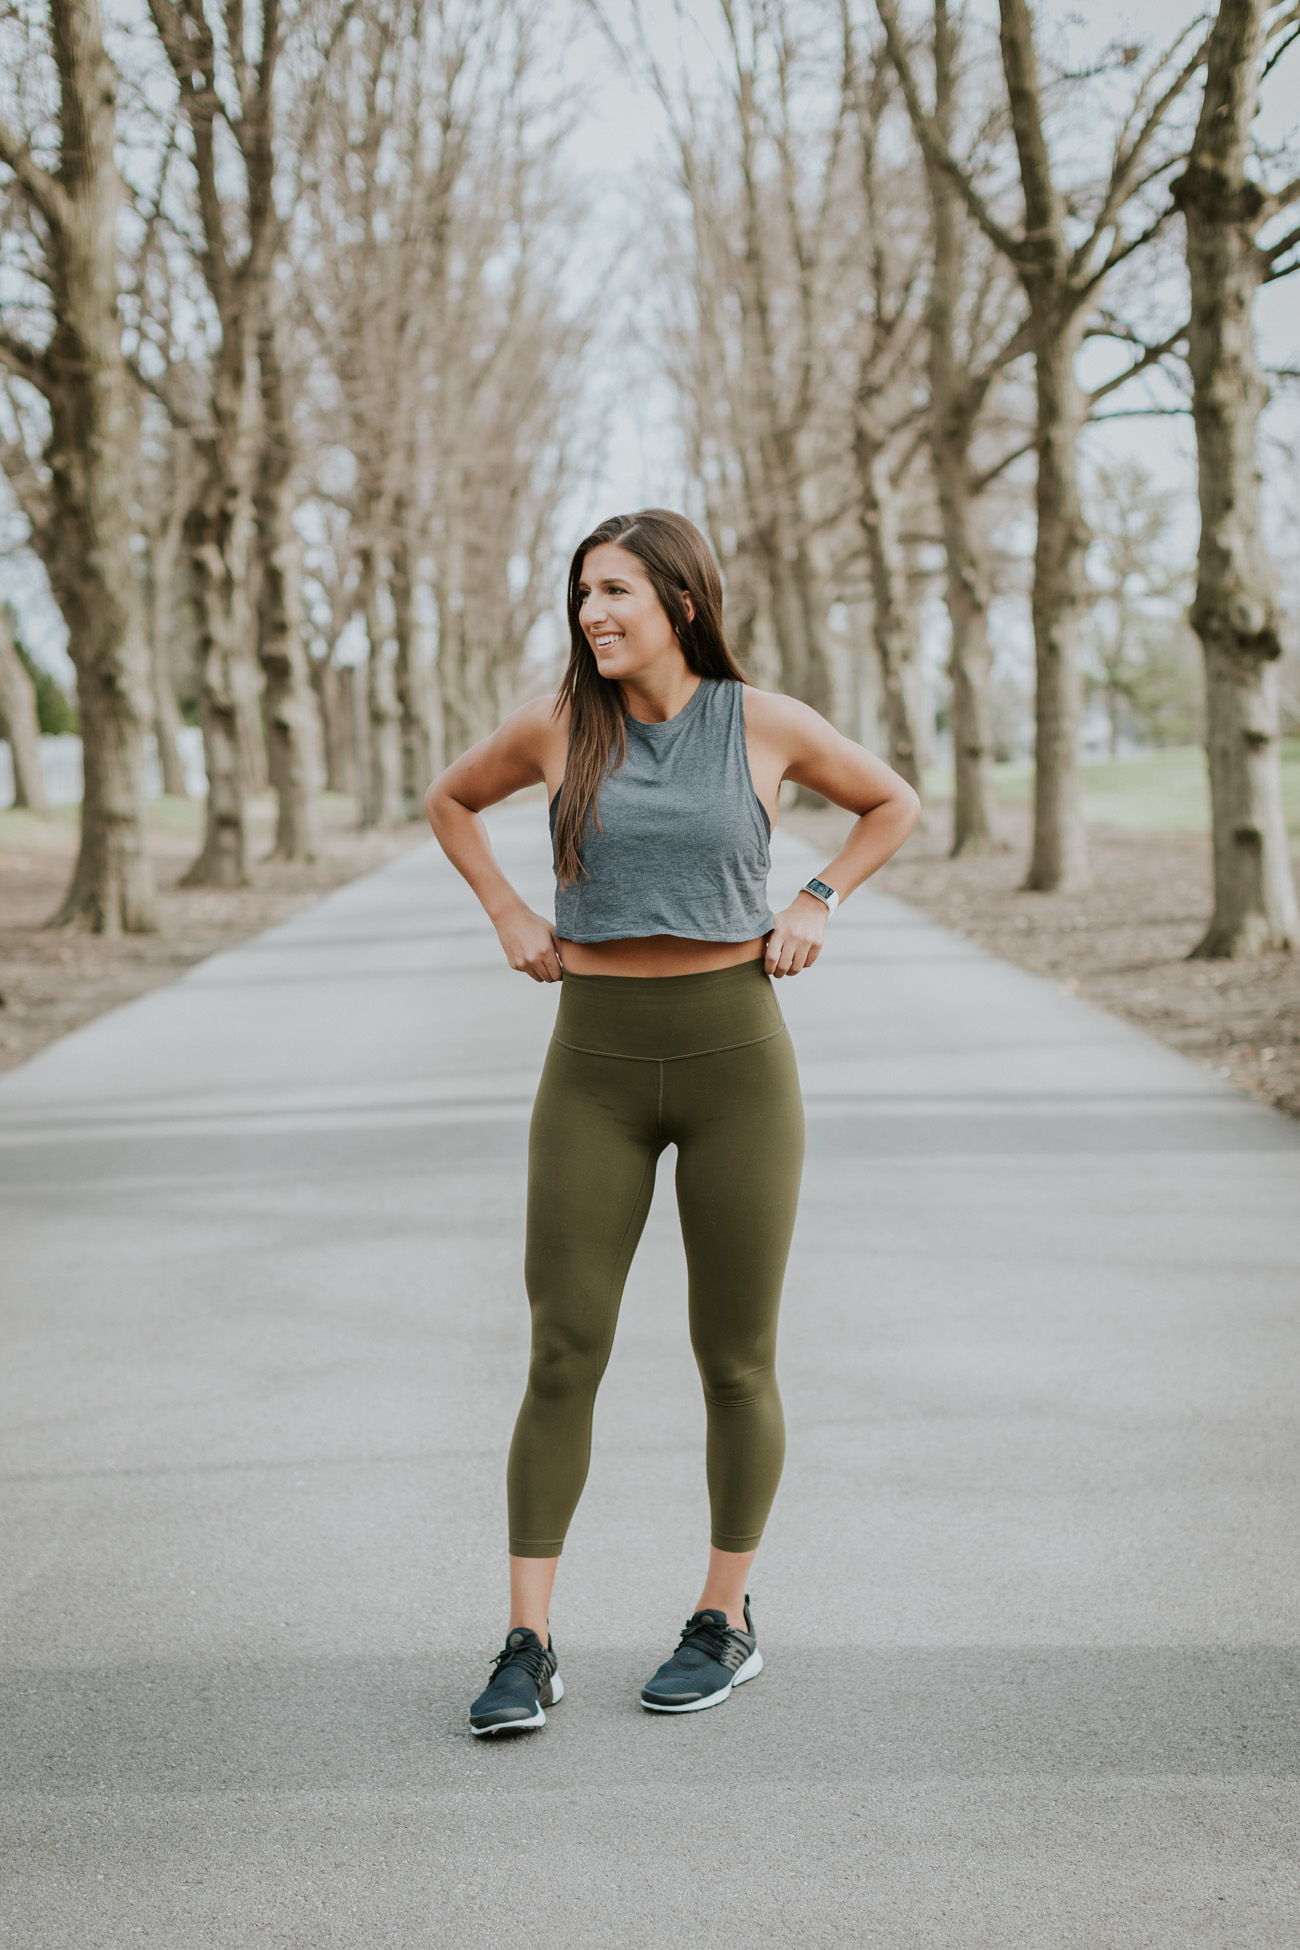 Weekly Workout Routine: Gray Crop Top | A Southern Drawl1300 x 1950